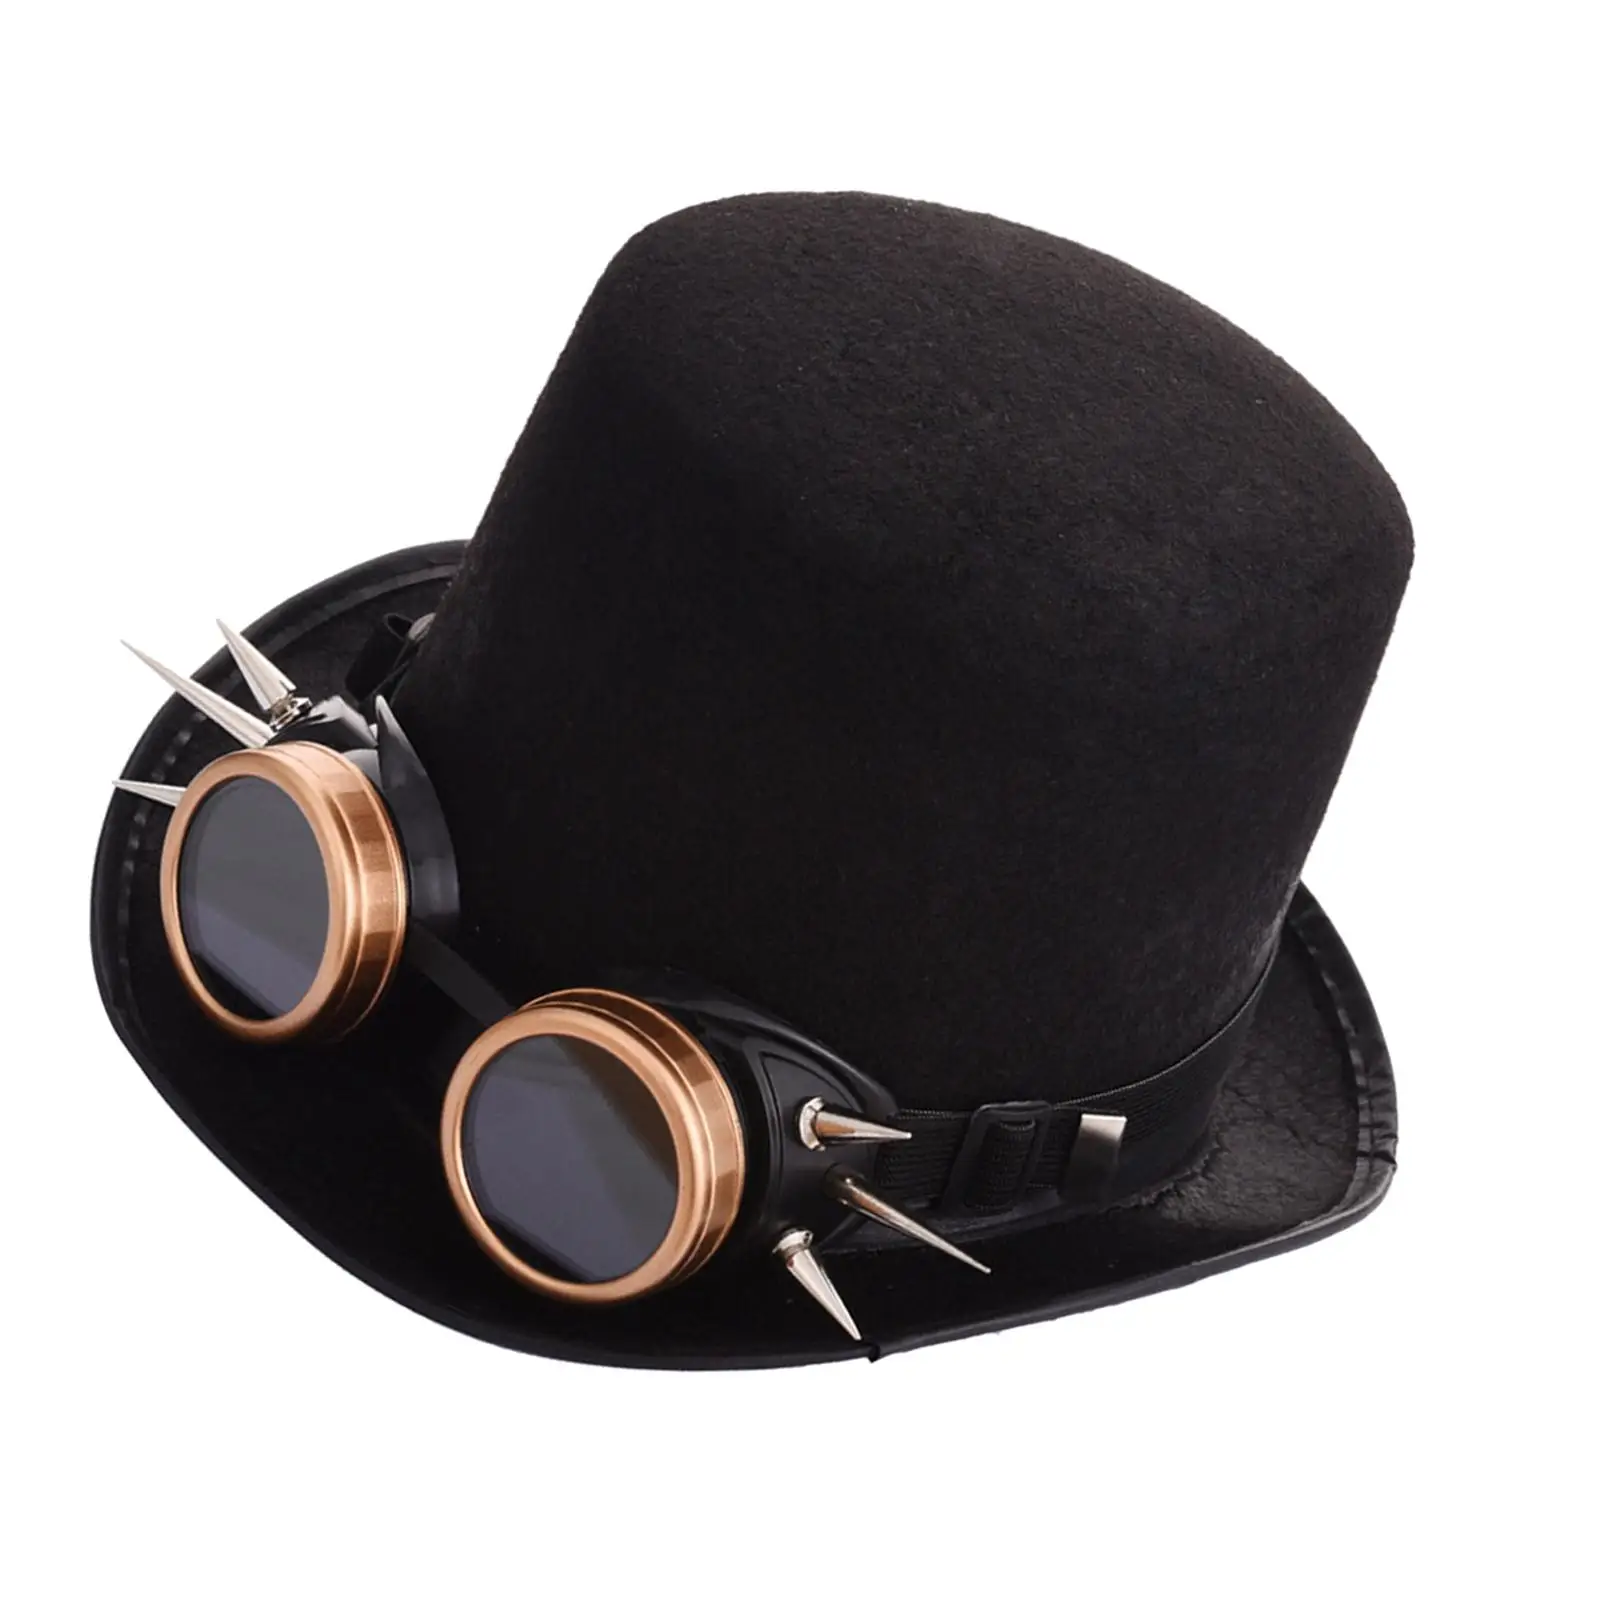 Vintage Style Steampunk Top Hat with Goggles Costume Accessory Cosplay Hat Halloween Party Hat Head Gear Punk Top Hats for Women